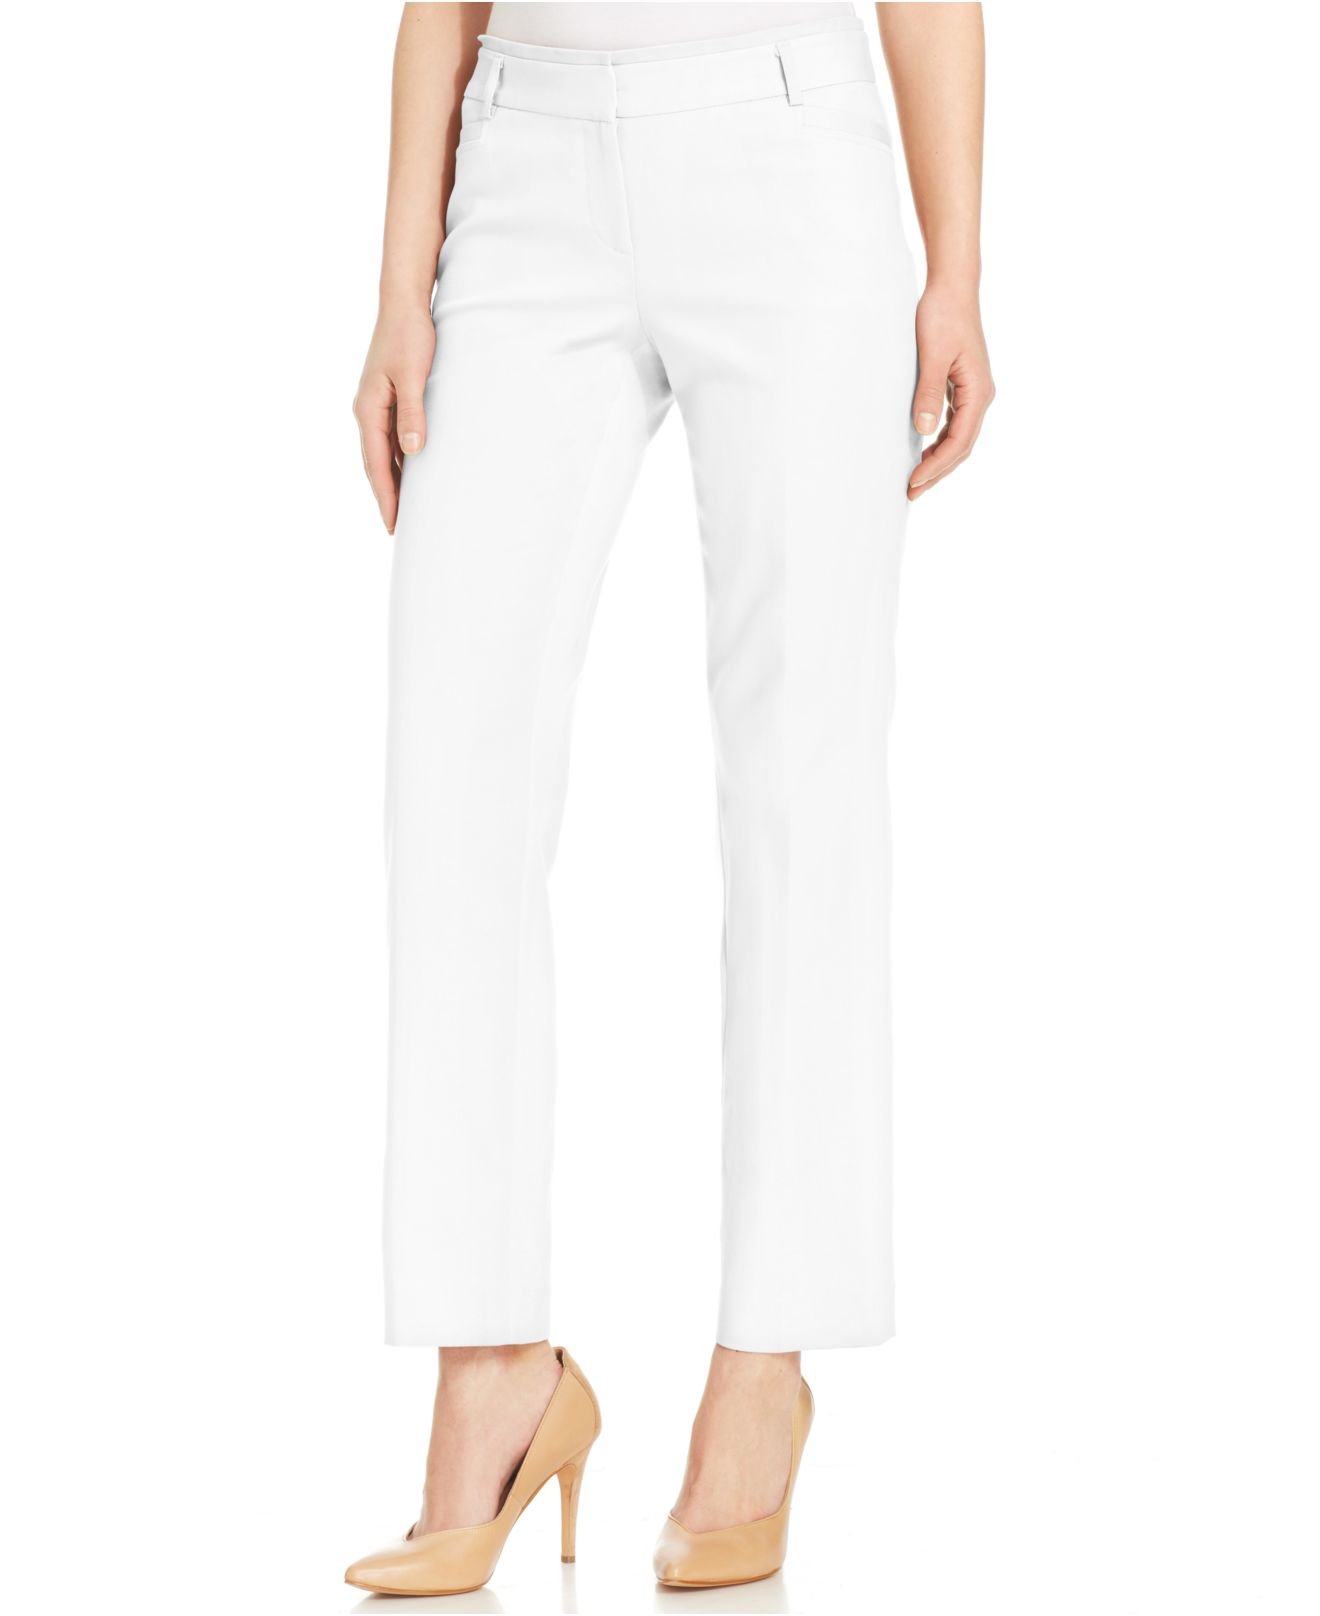 Laundry by shelli segal Straight-Leg Pants in White | Lyst